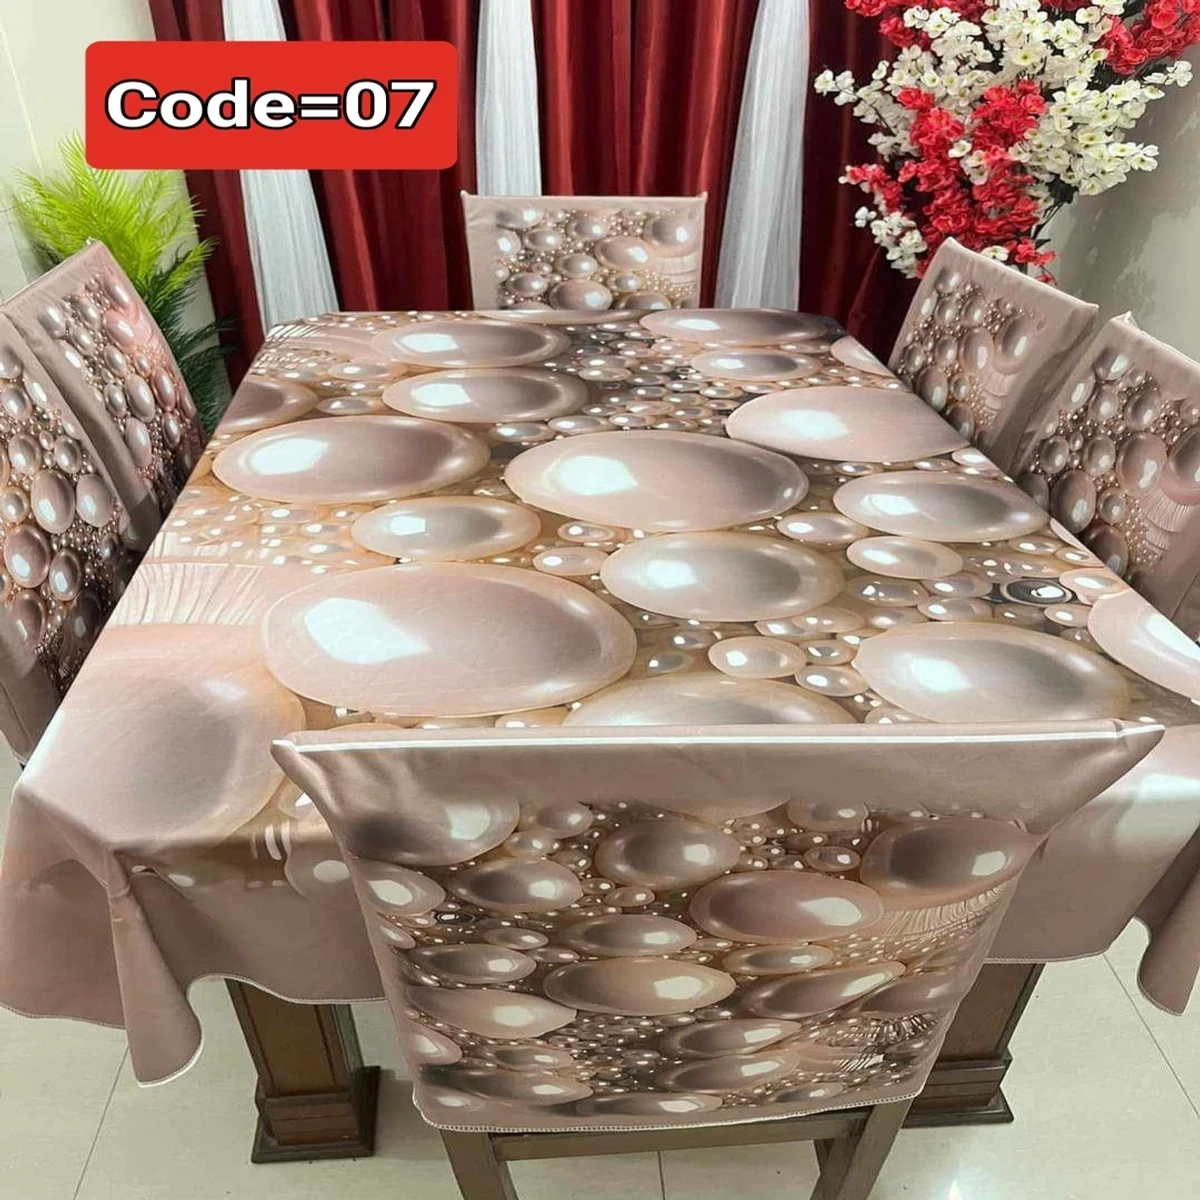 3D Pint Dining table and chair cover code = 07